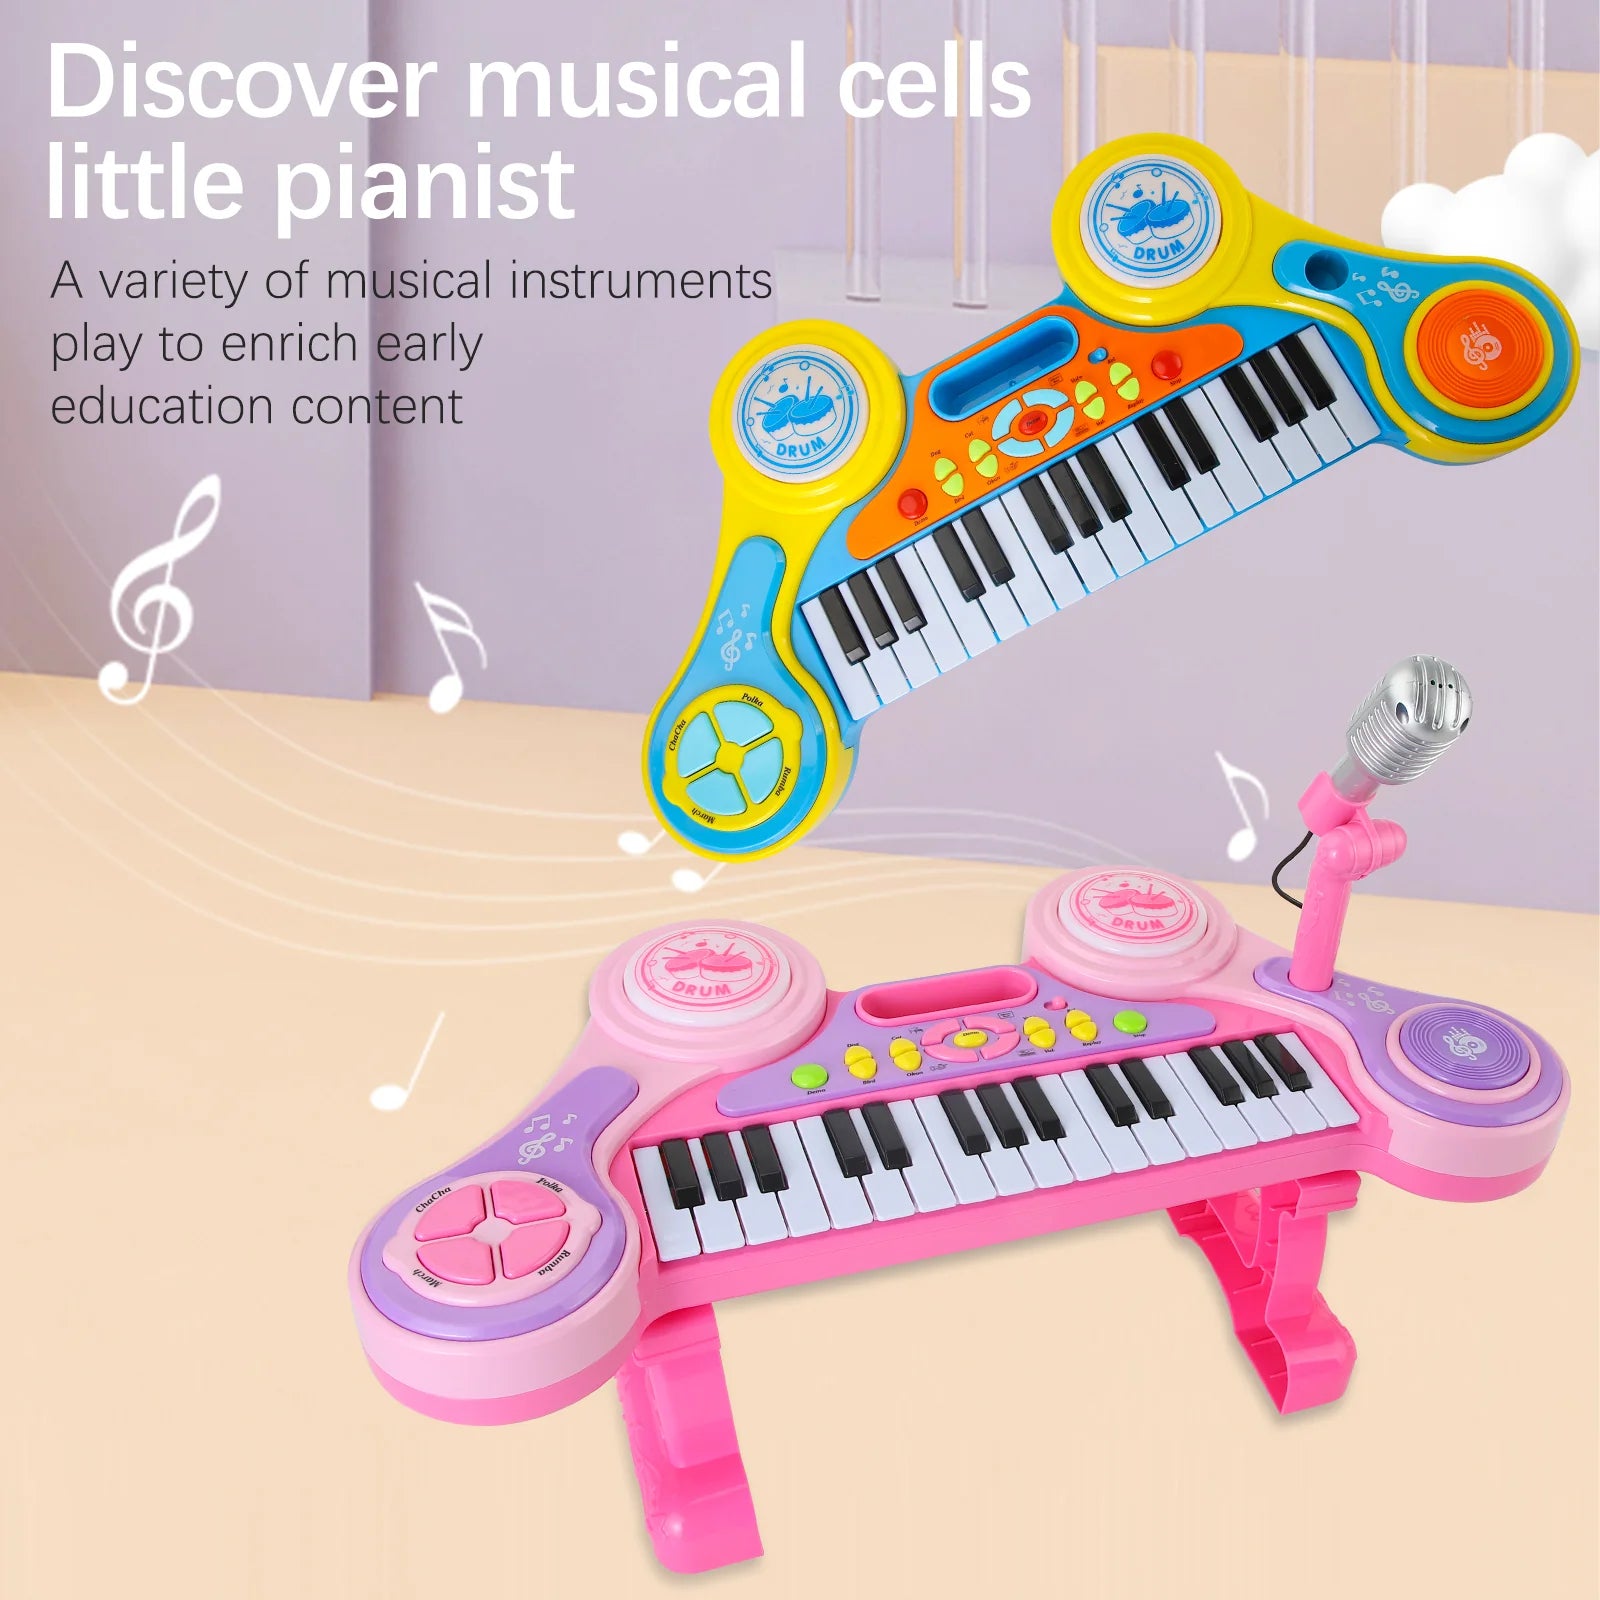 A vibrant children's electric keyboard piano with luminous features and a separate microphone, designed for interactive musical play and early education.